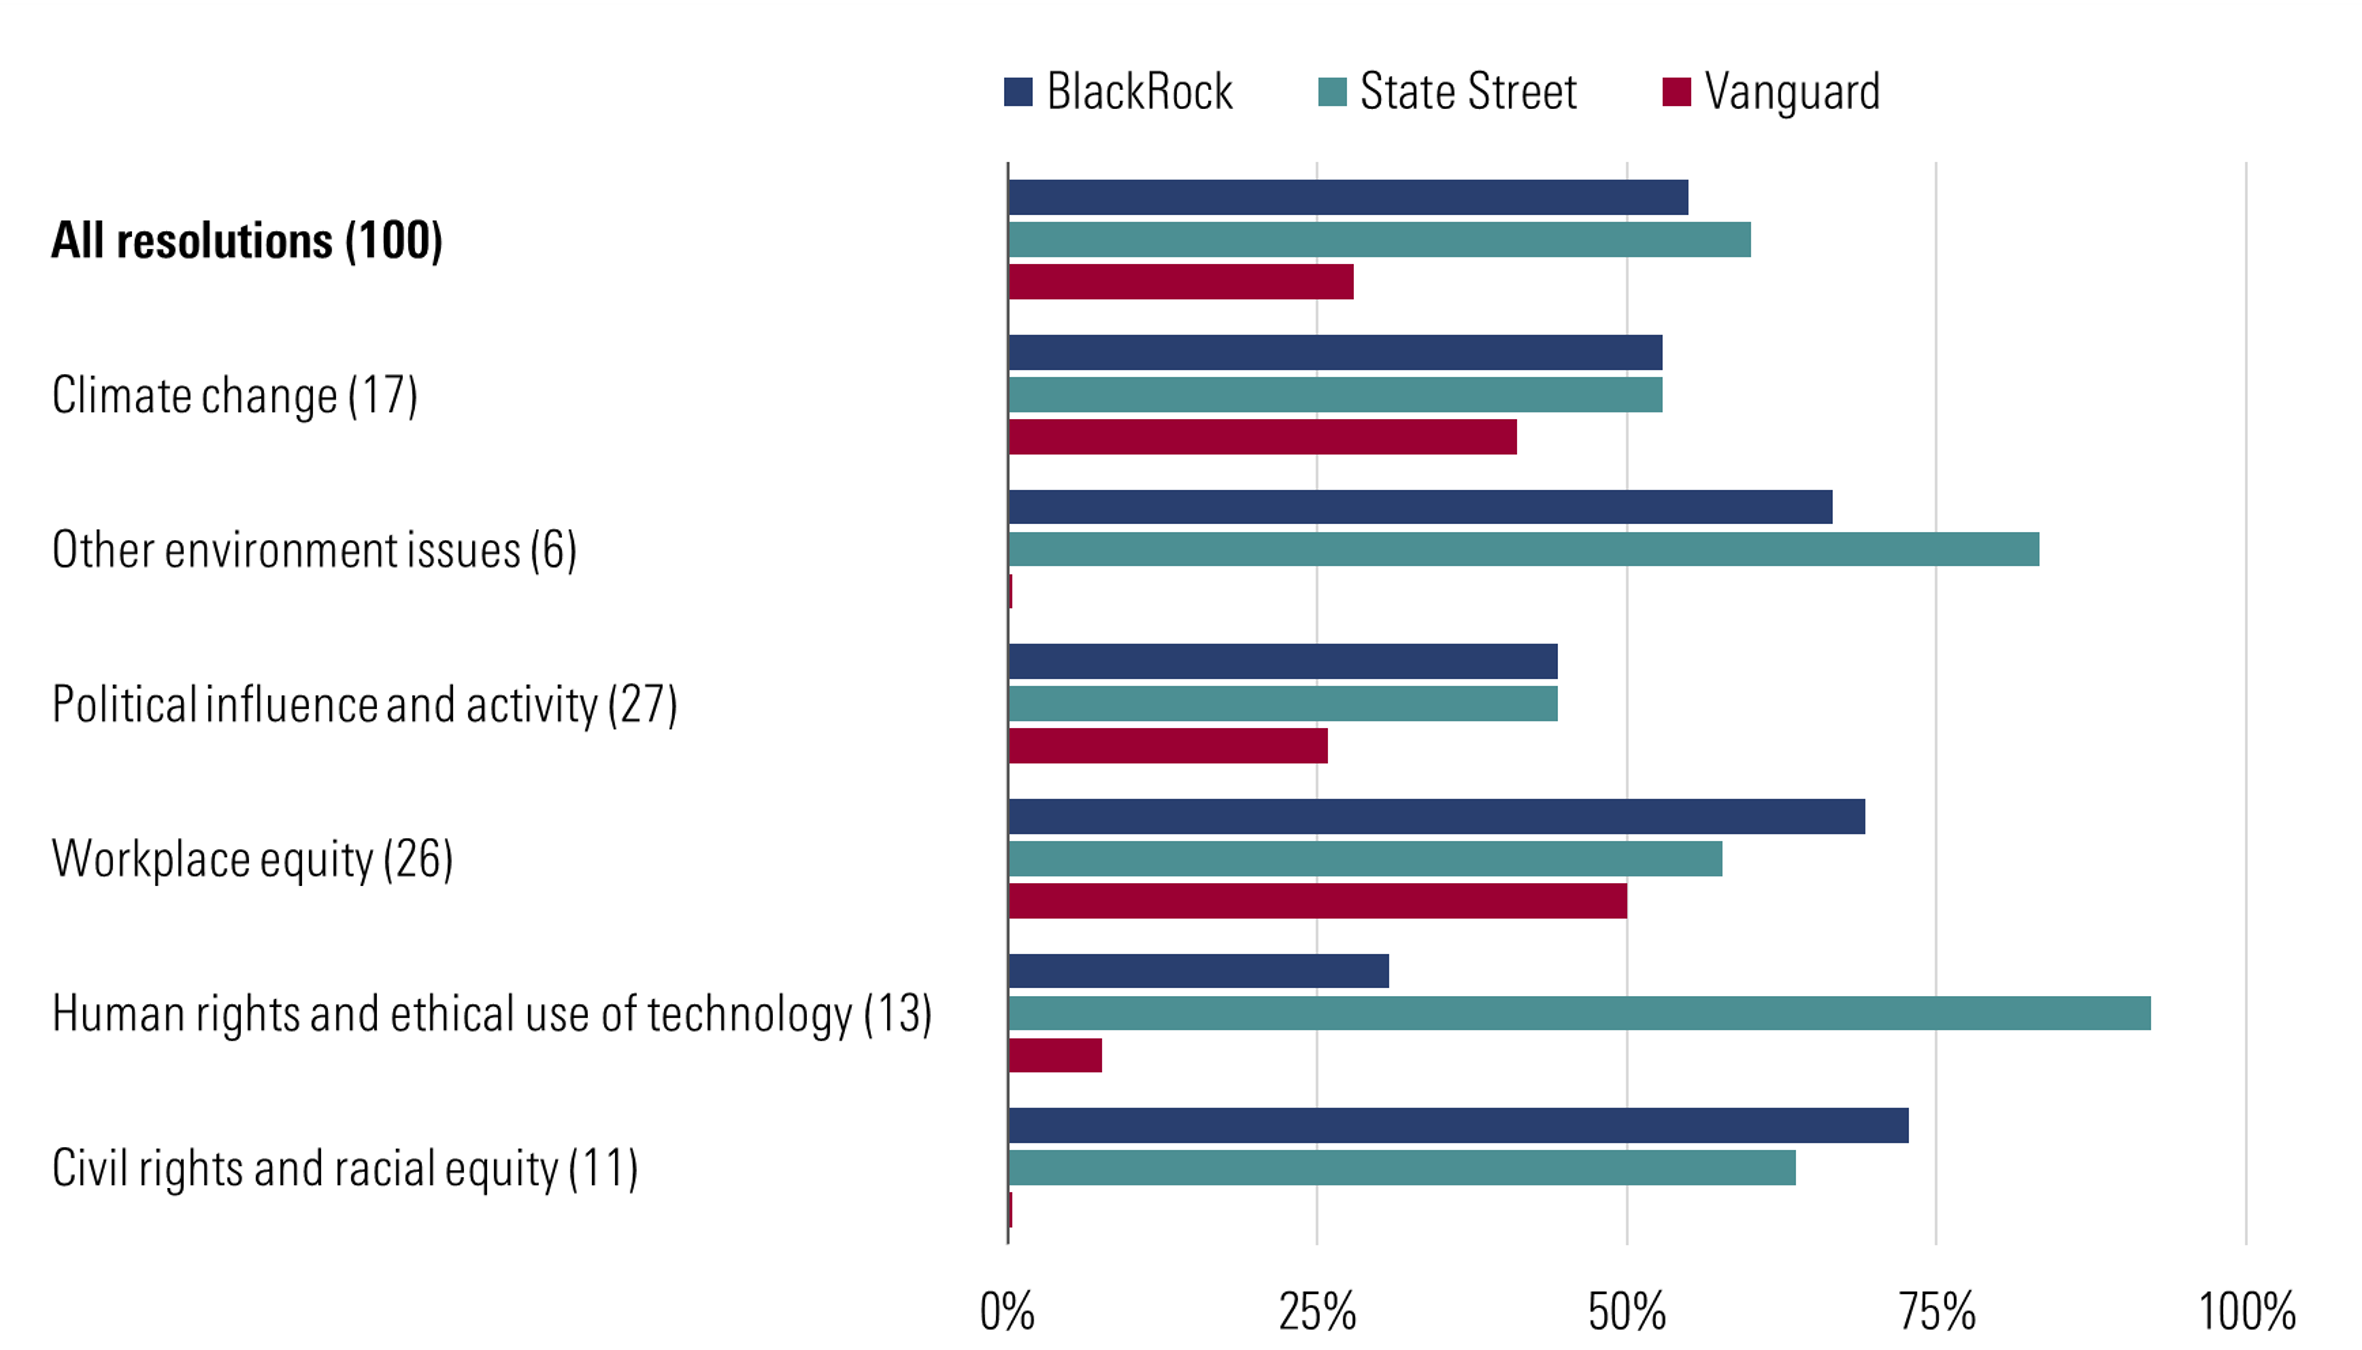 Chart showing the percentage of 100 key resolutions supported by the Big Three firms (BlackRock, State Street and Vanguard) by topic. BlackRock was the strongest supporter of workplace equity and civil rights and racial equity resolutions. State Street was the strongest supporter of resolutions on human rights and ethical use of technology. Vanguard showed the lowest level of support for resolutions across all topics.